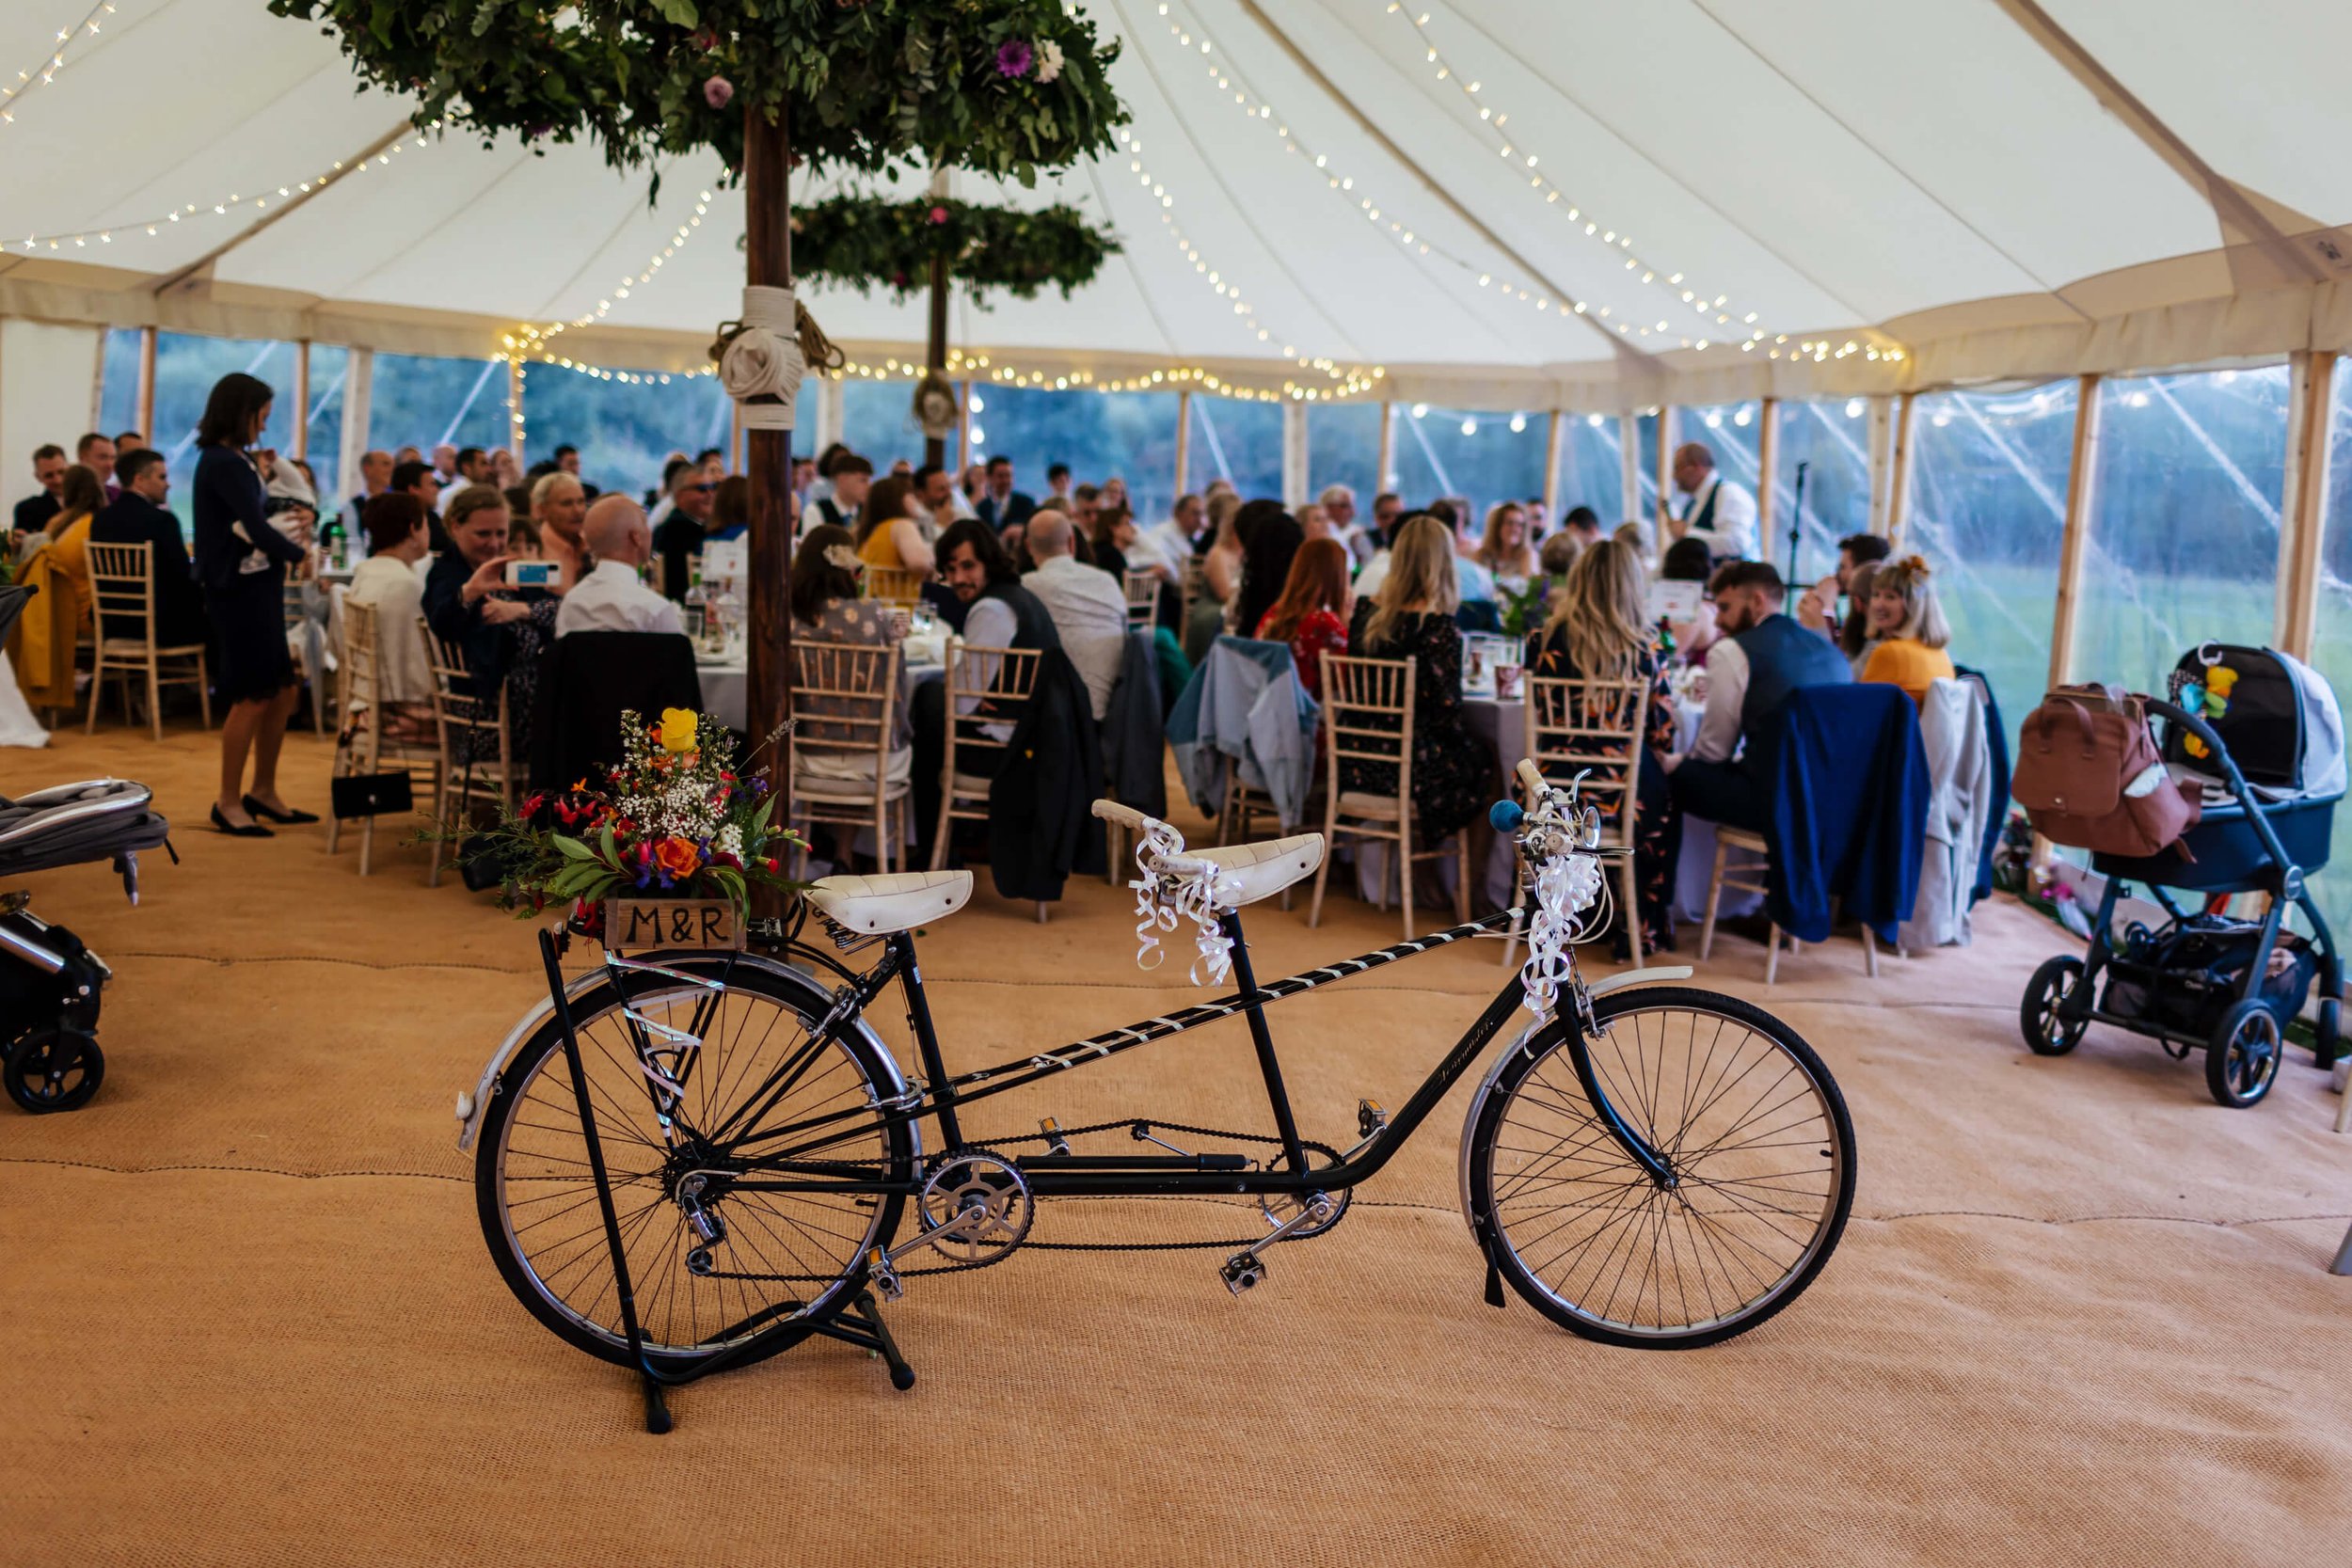 A tandem bicycle wedding gift